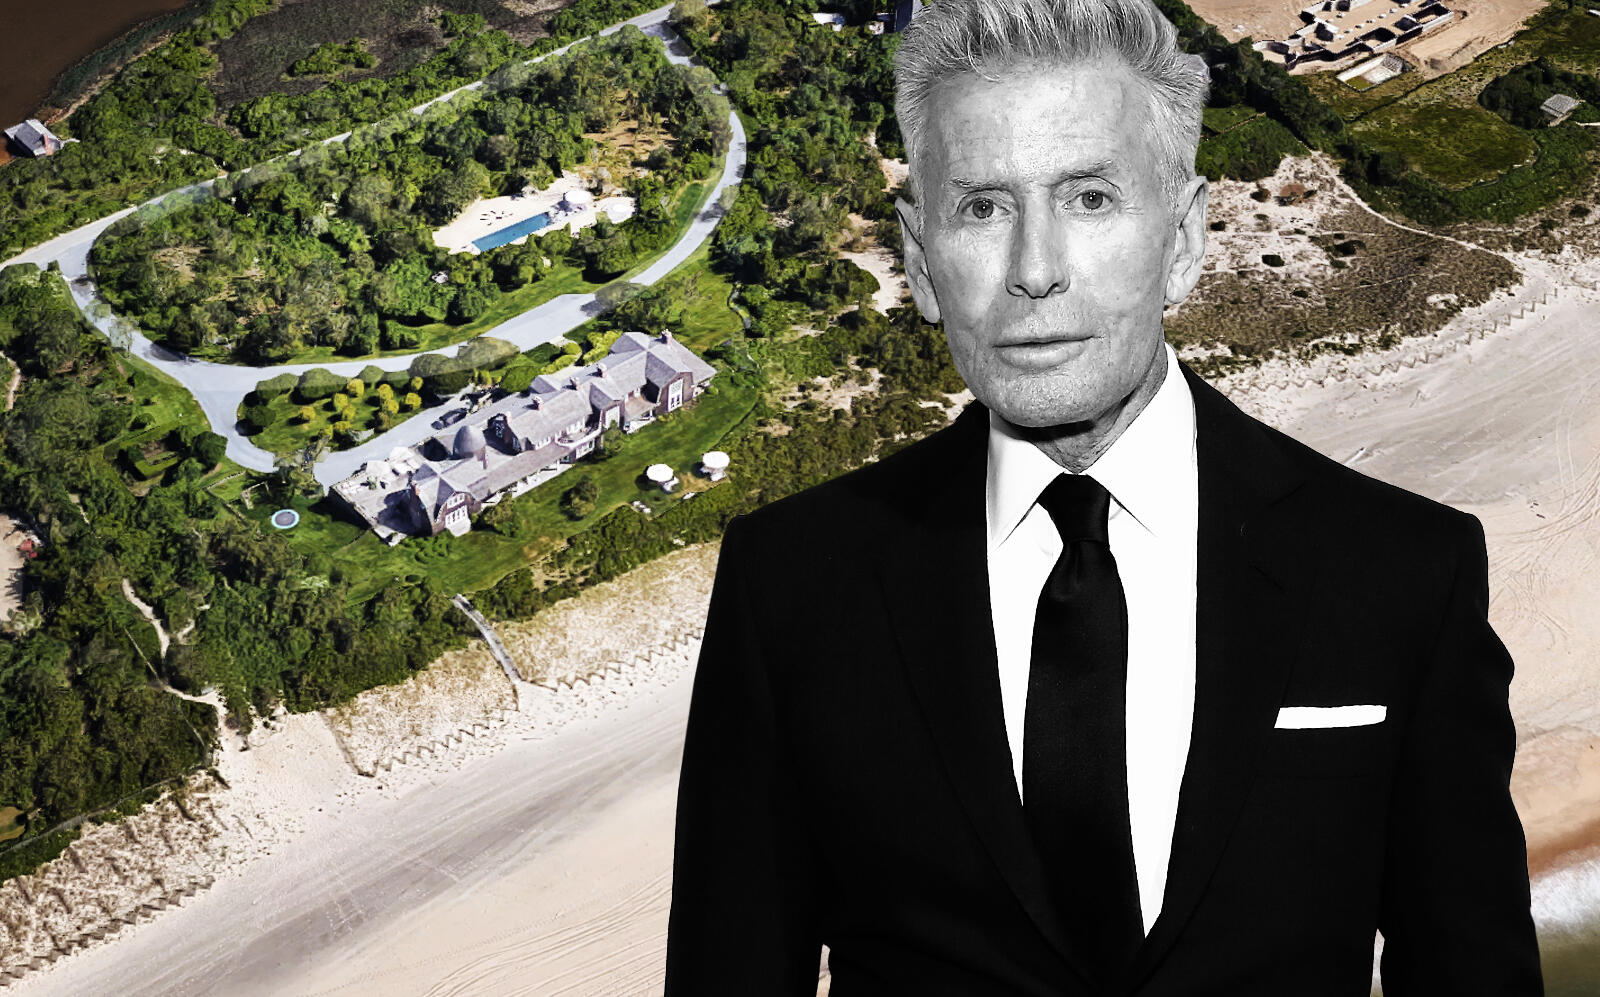 Calvin Klein and the property (Getty, Google Maps)